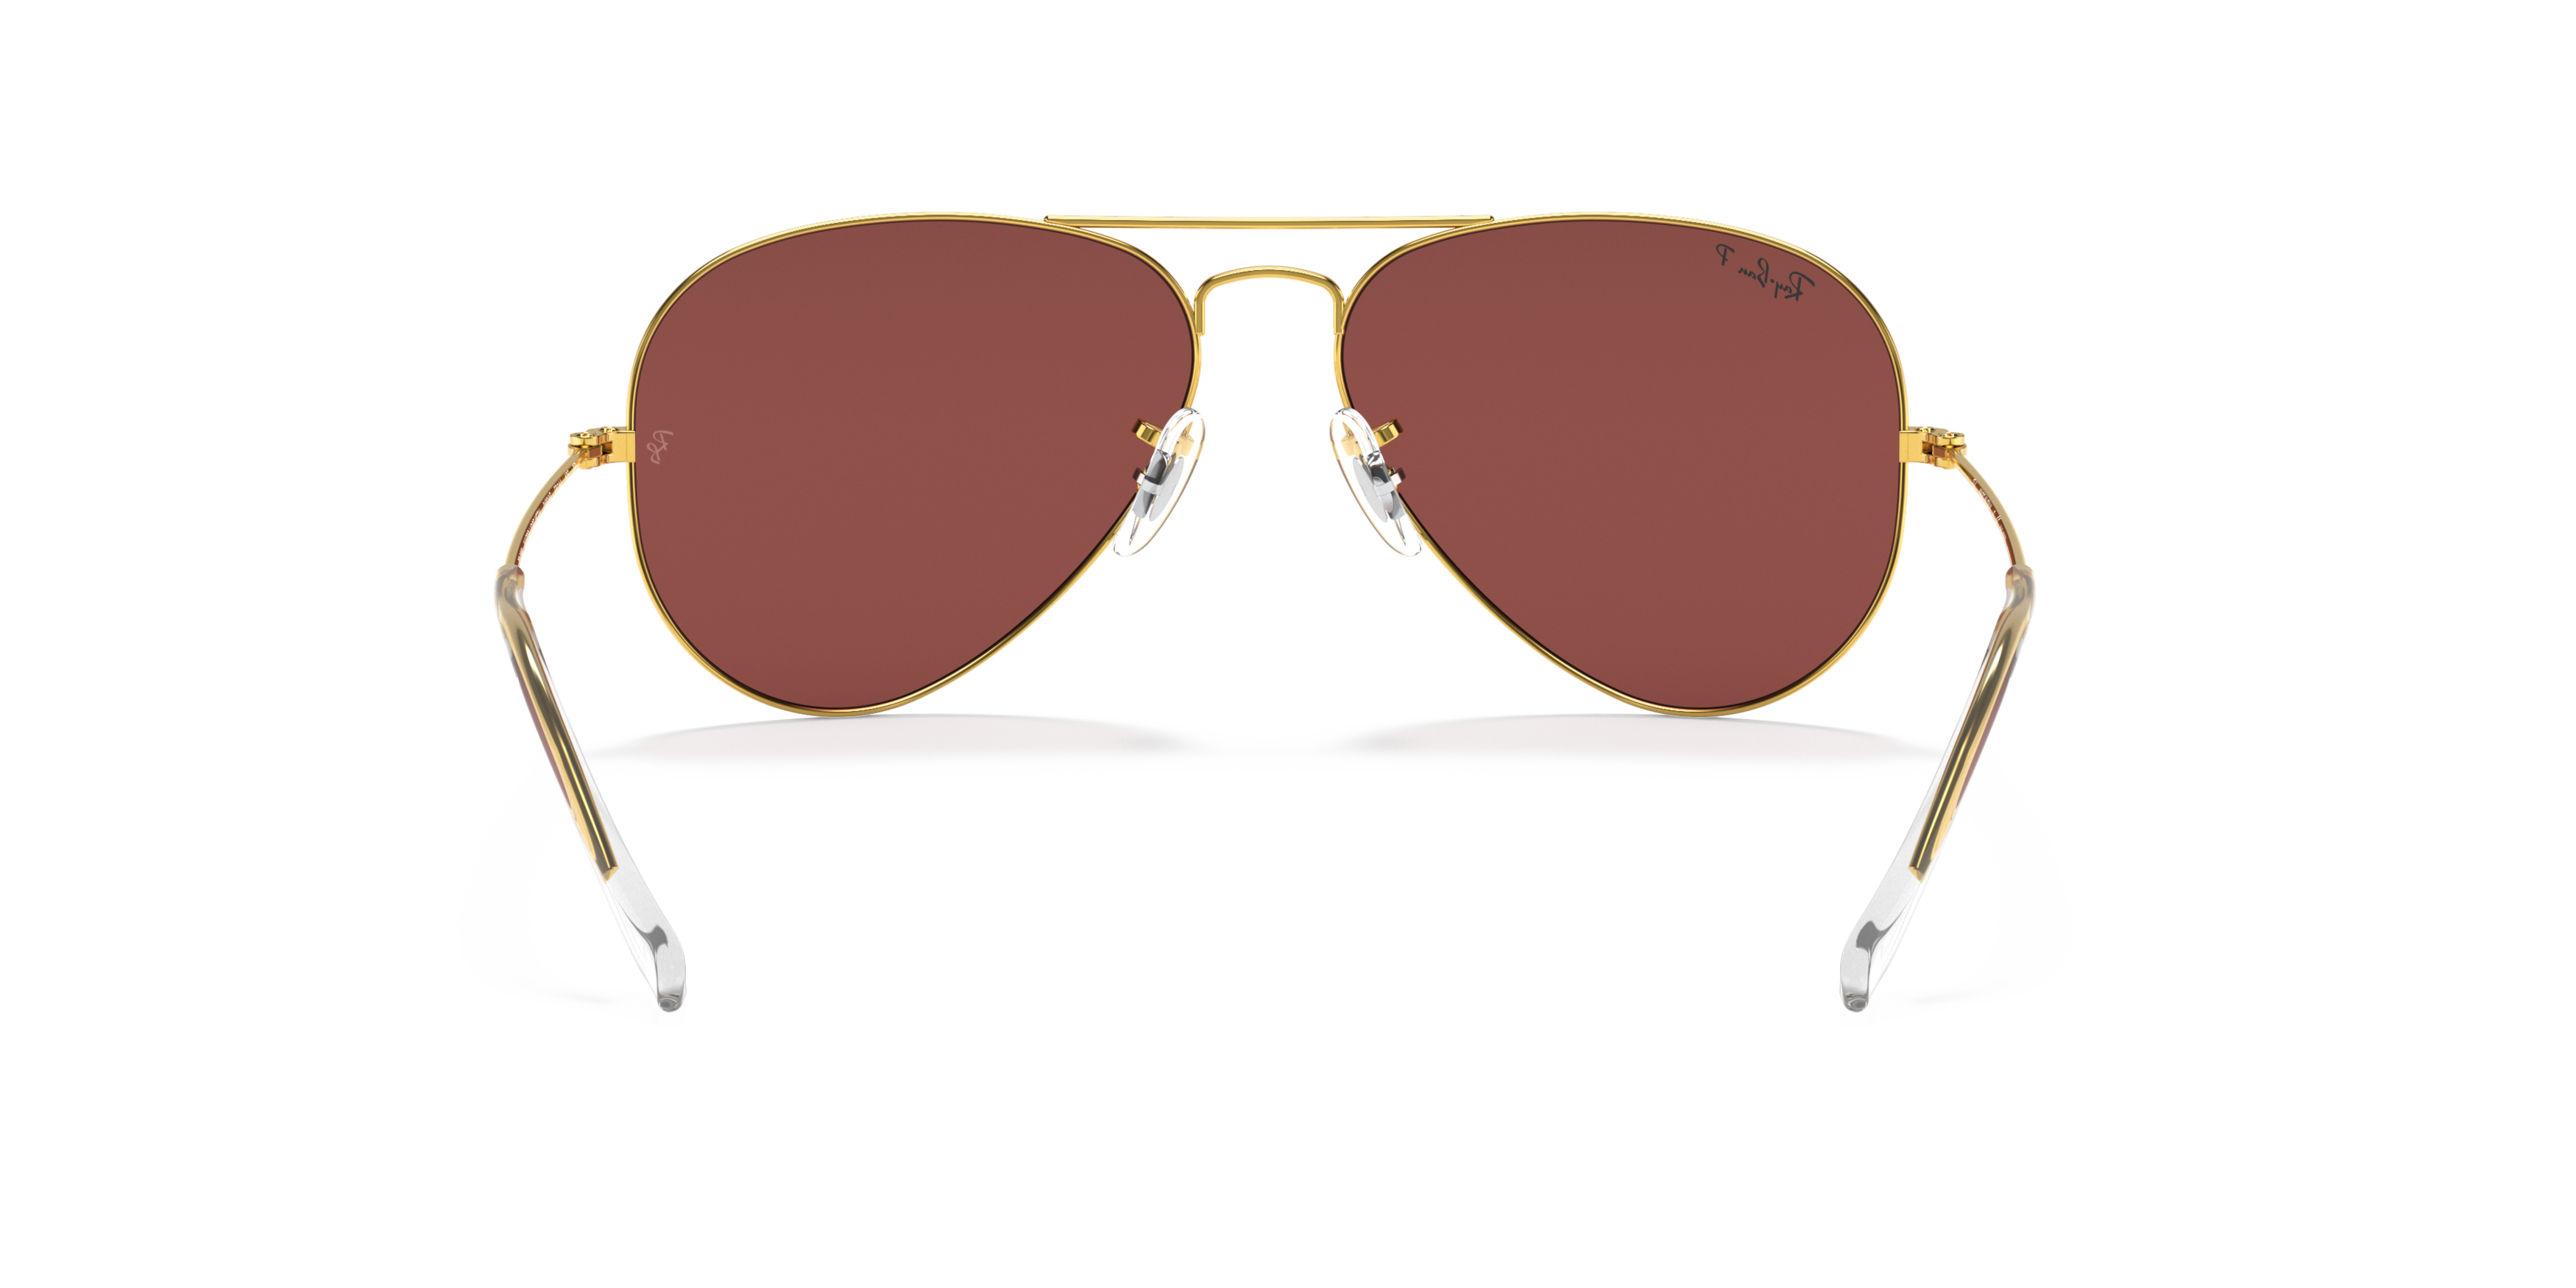 [products.image.detail02] Ray-Ban Aviator Classic RB3025 9196AF